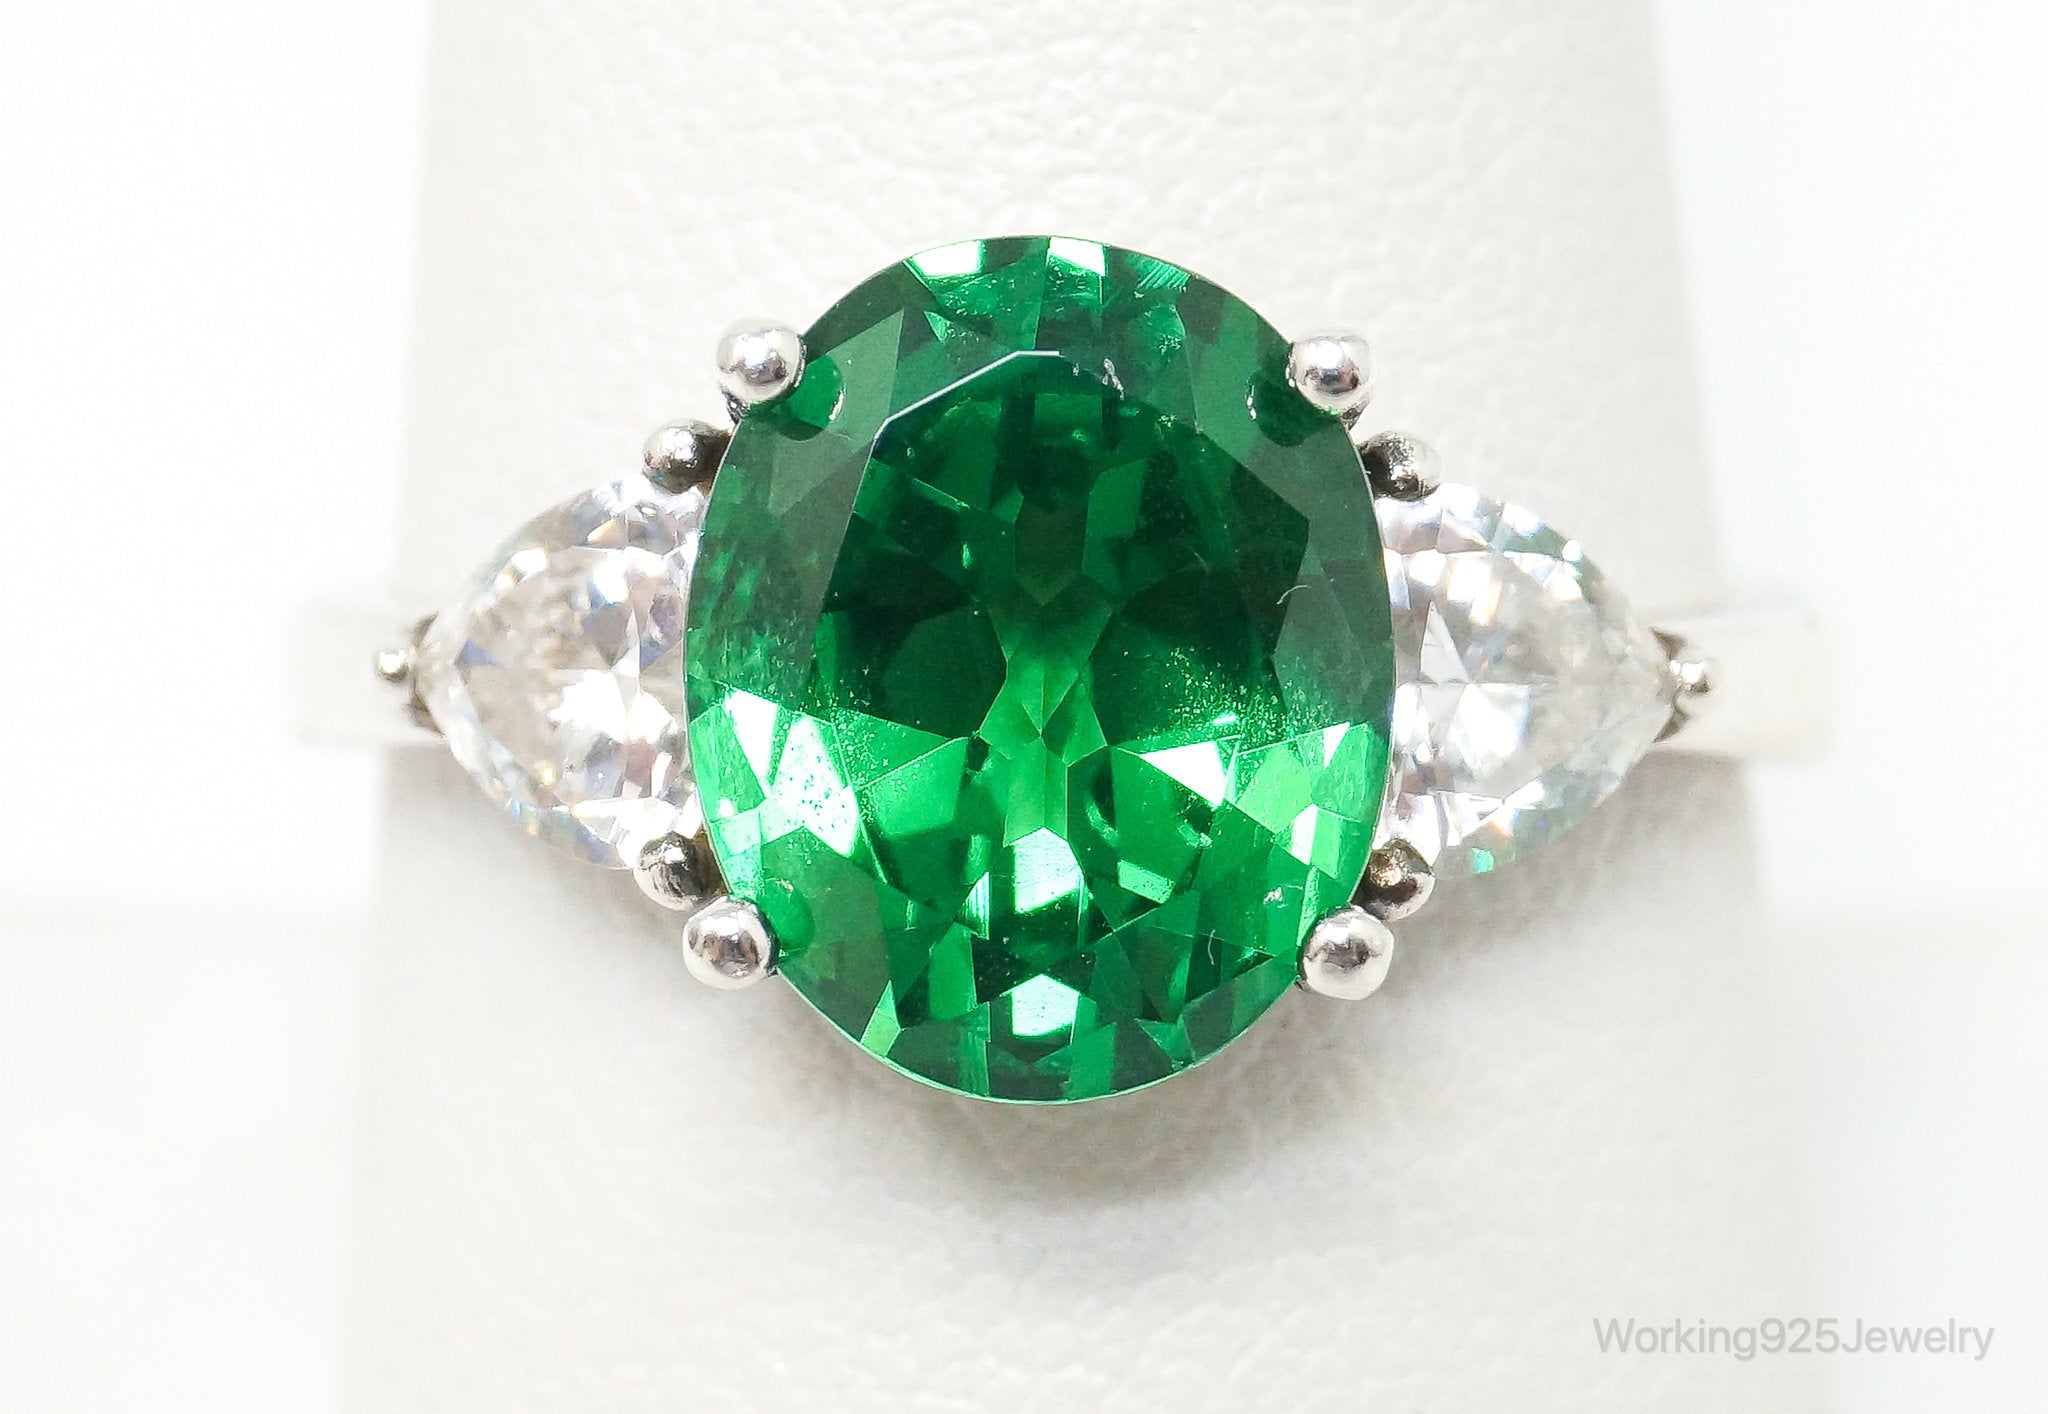 Vintage Simulated Emerald DQCZ Accented Sterling Silver Ring SZ 8.5